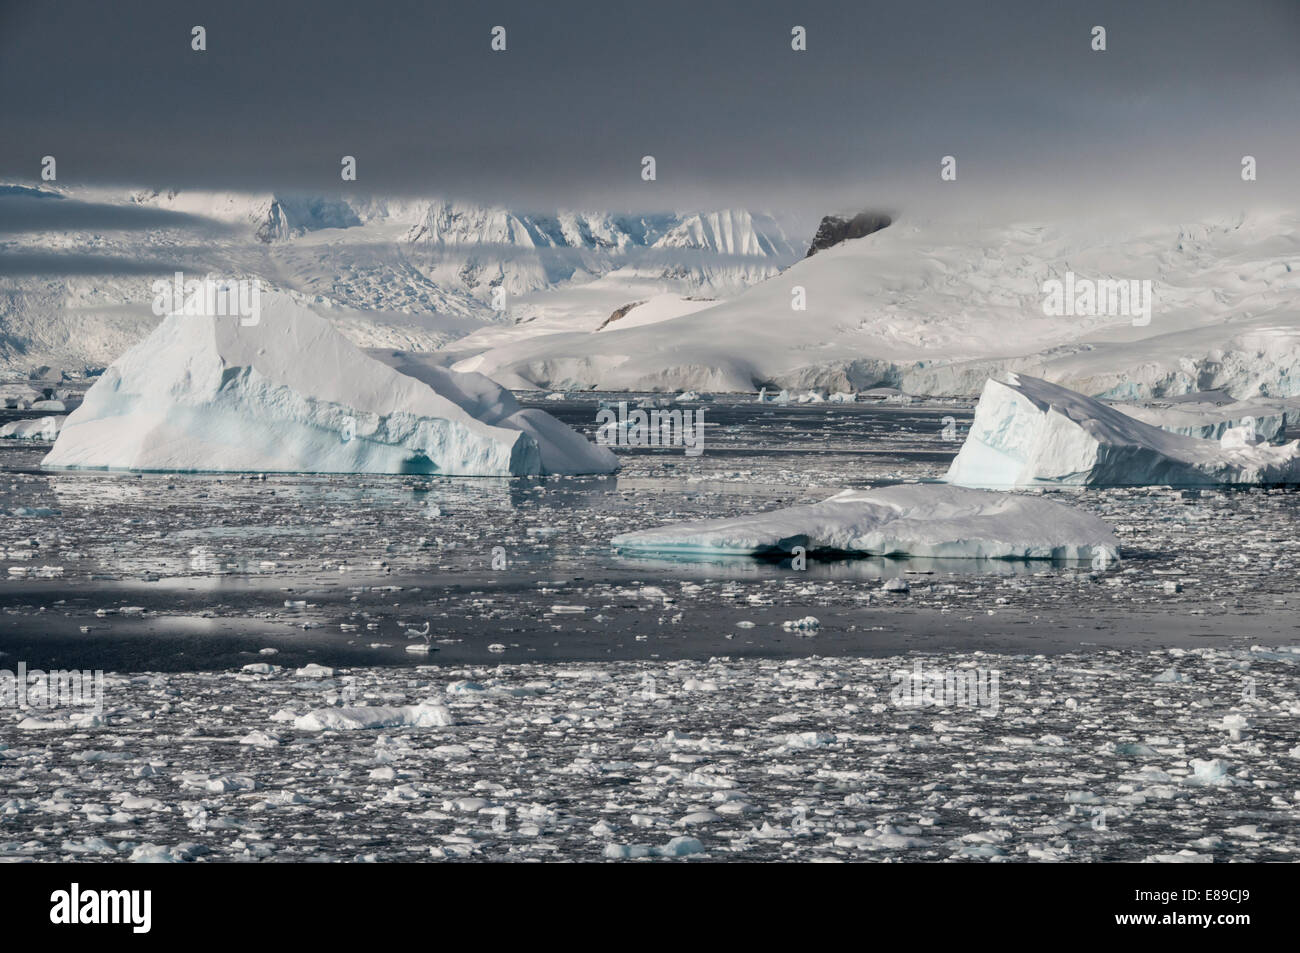 A view across the frozen landscape and icebergs of Charlotte Bay in Antarctica Stock Photo